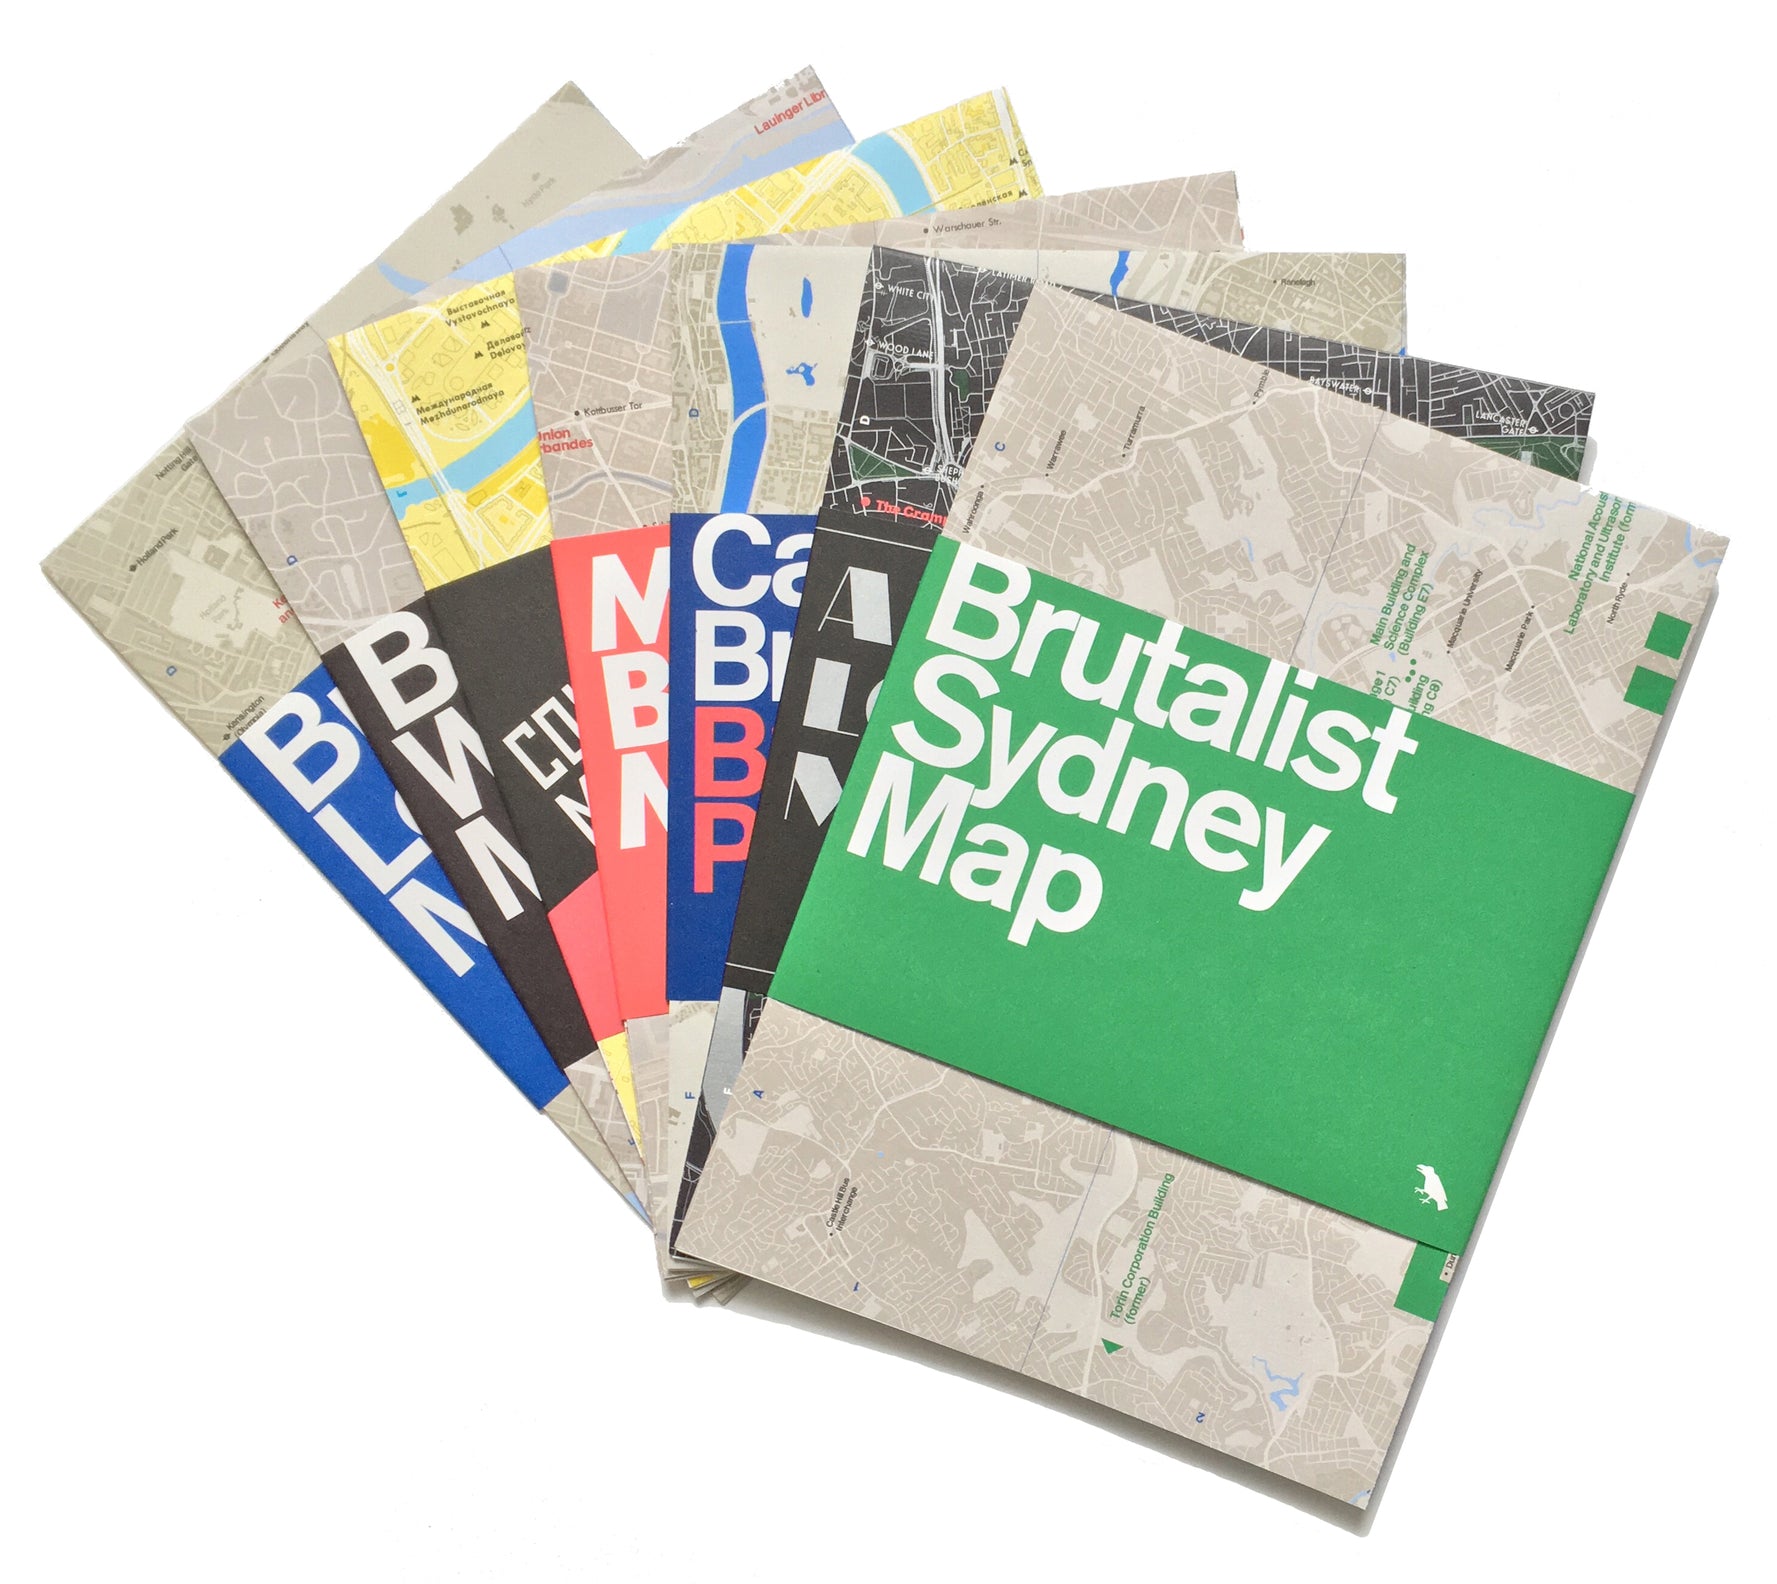 London Underground Architecture and Design Map (announced as London Tube Map) cover